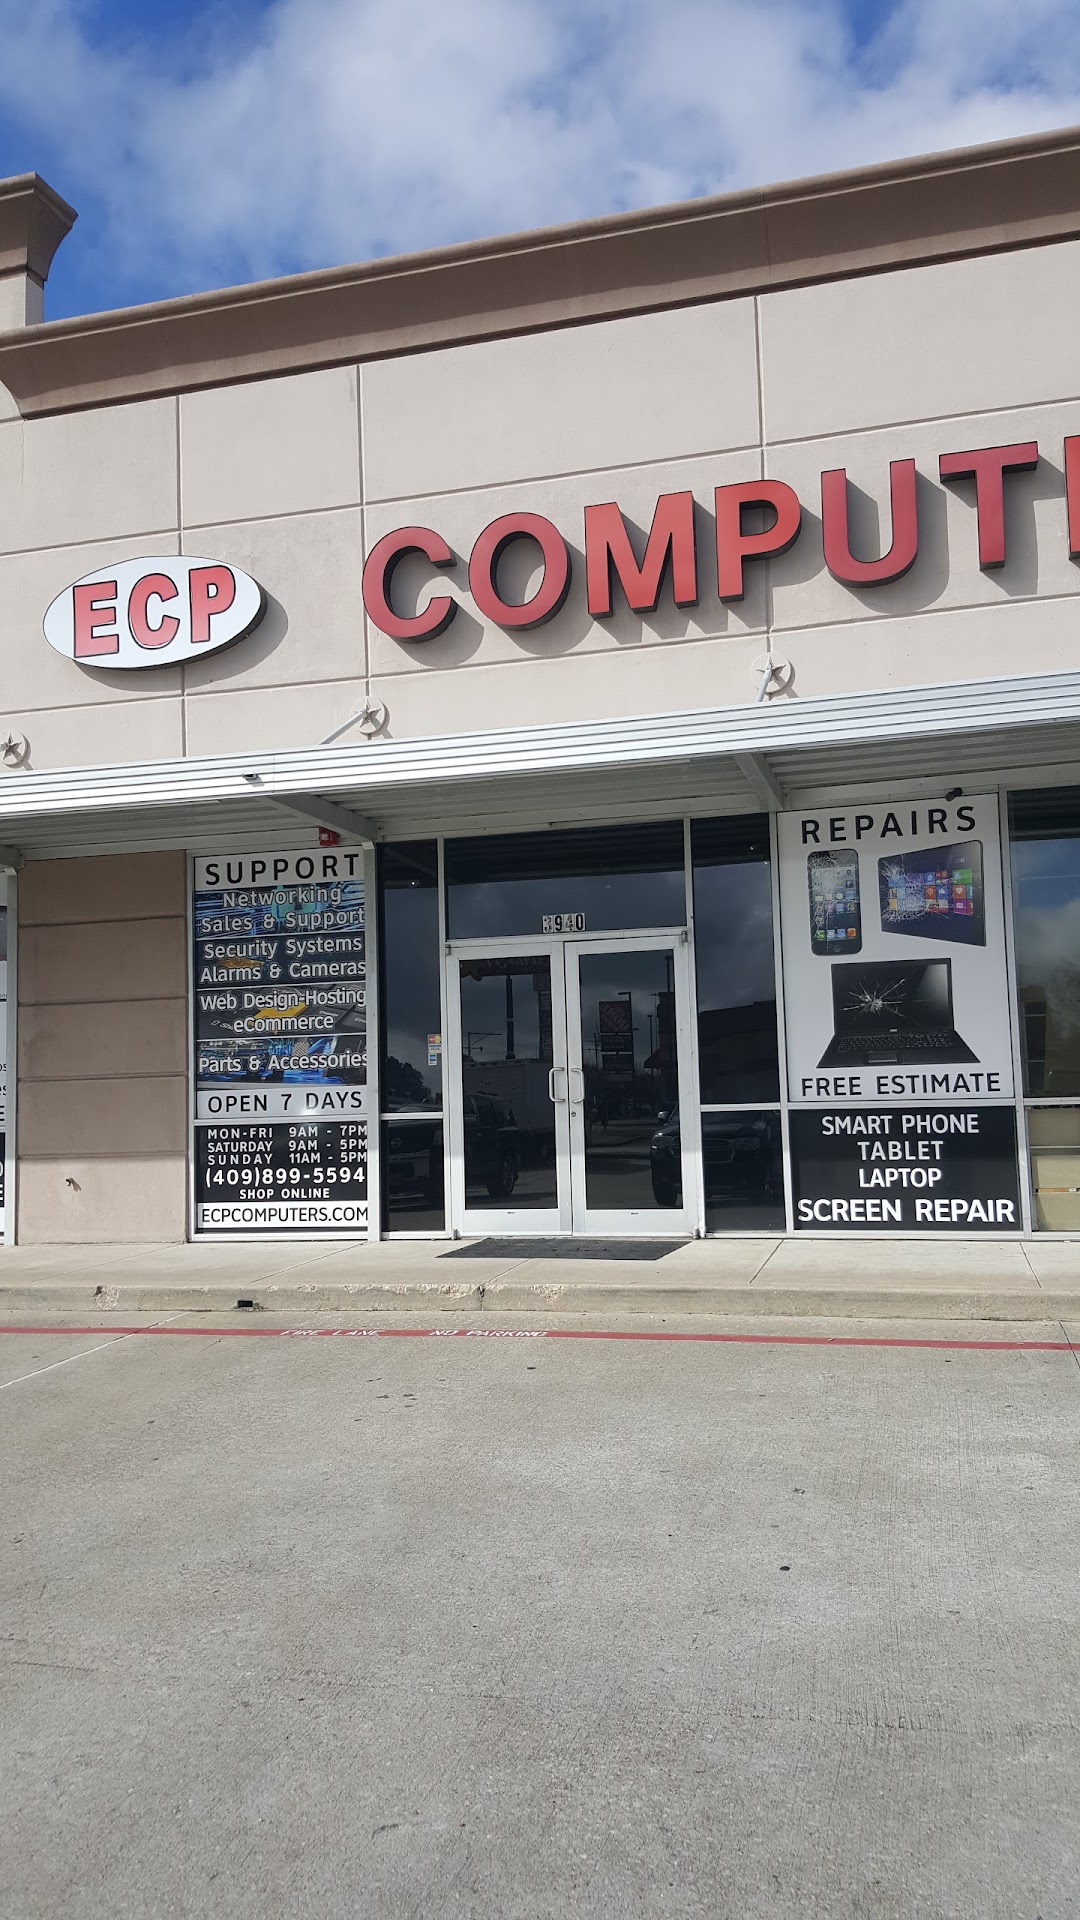 ECP Computers & More